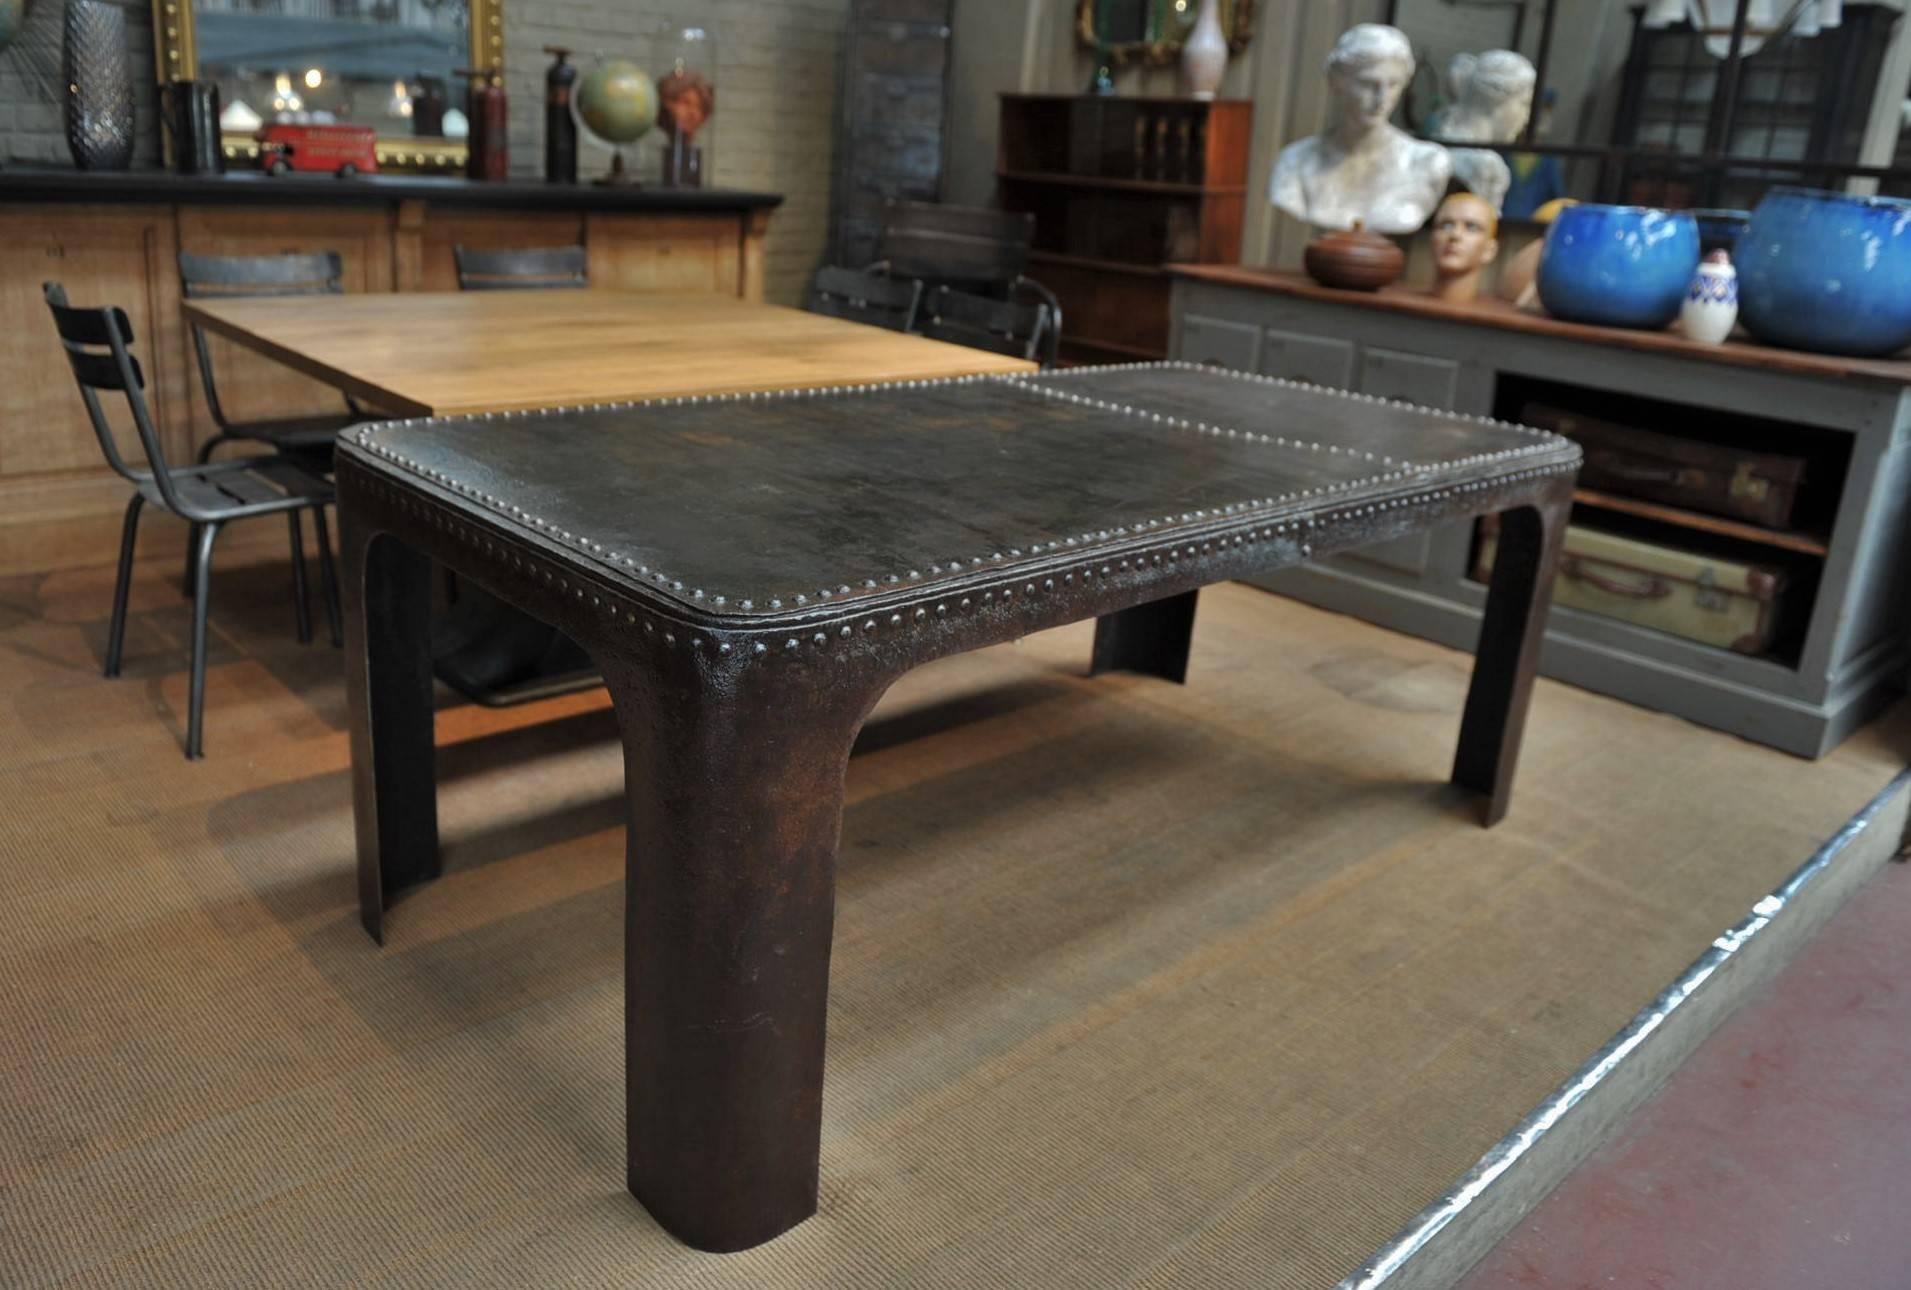 French factory old riveted iron trunk cut in Industrial dining table,
circa 1890. Weight 110 kg. Hand polished finish.